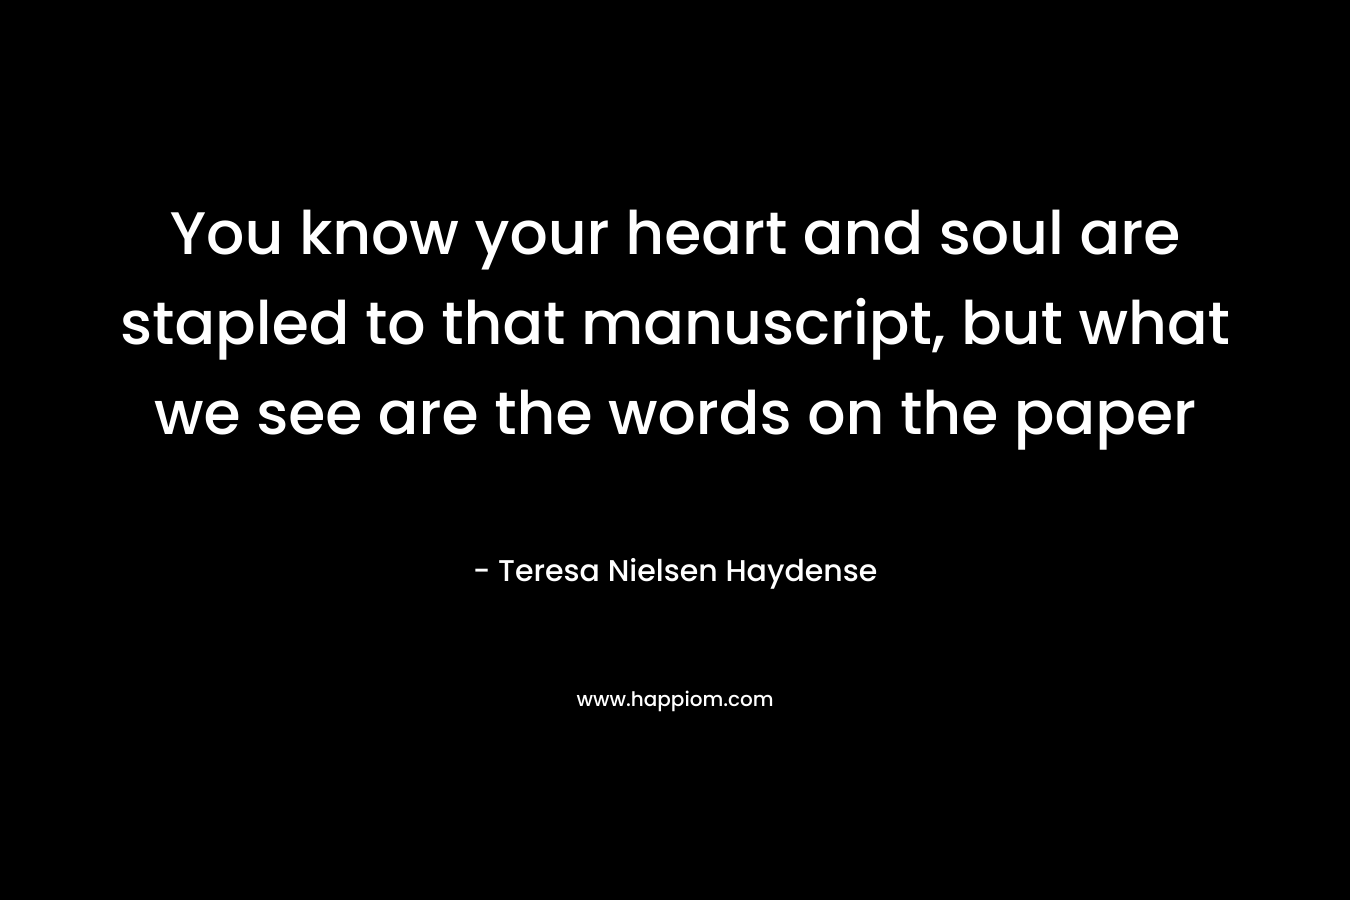 You know your heart and soul are stapled to that manuscript, but what we see are the words on the paper